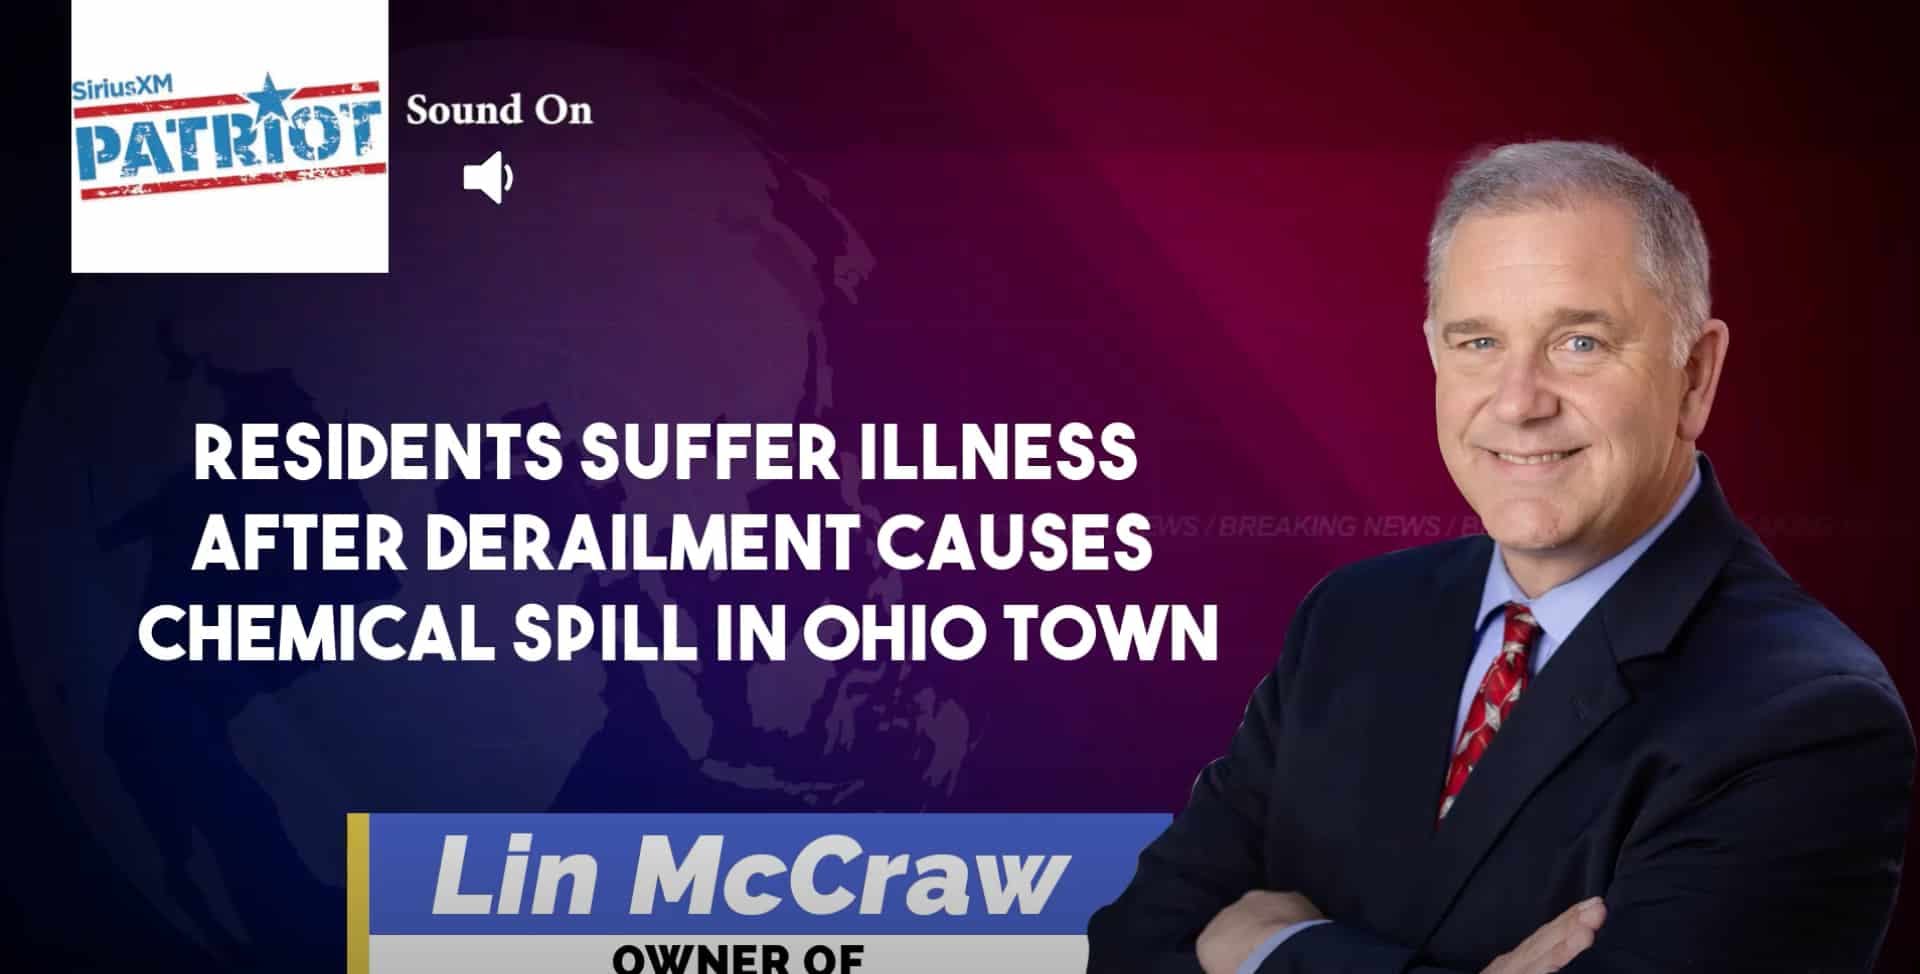 Are You Suffering Illness after the Ohio Town Chemical Spill Derailment?